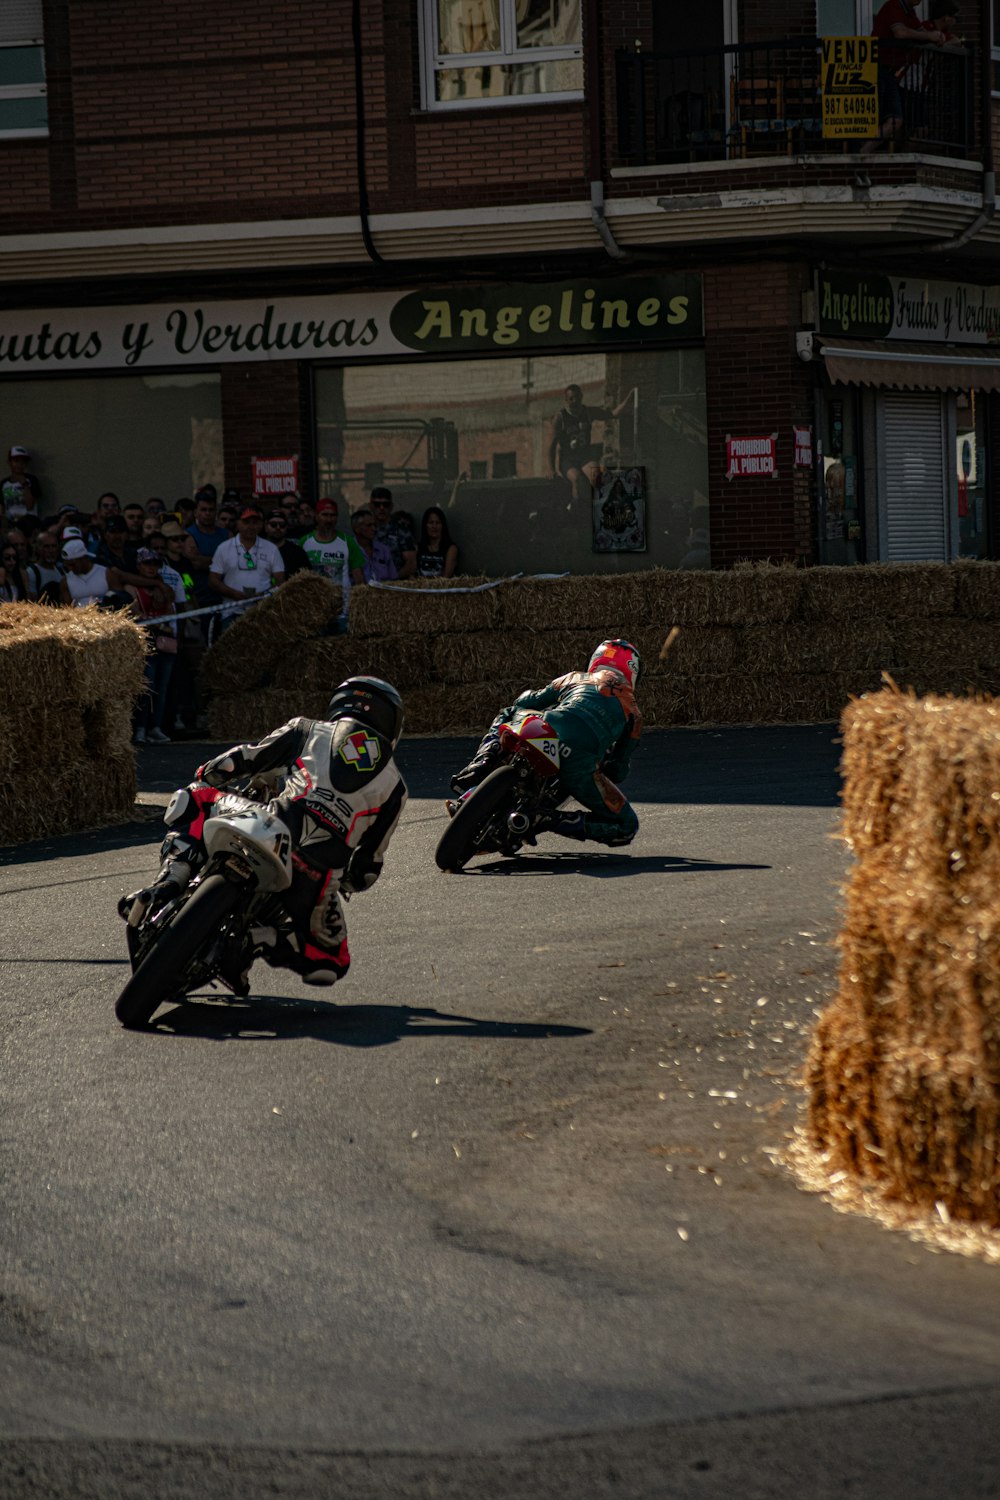 a couple of motorcyclists racing down a street